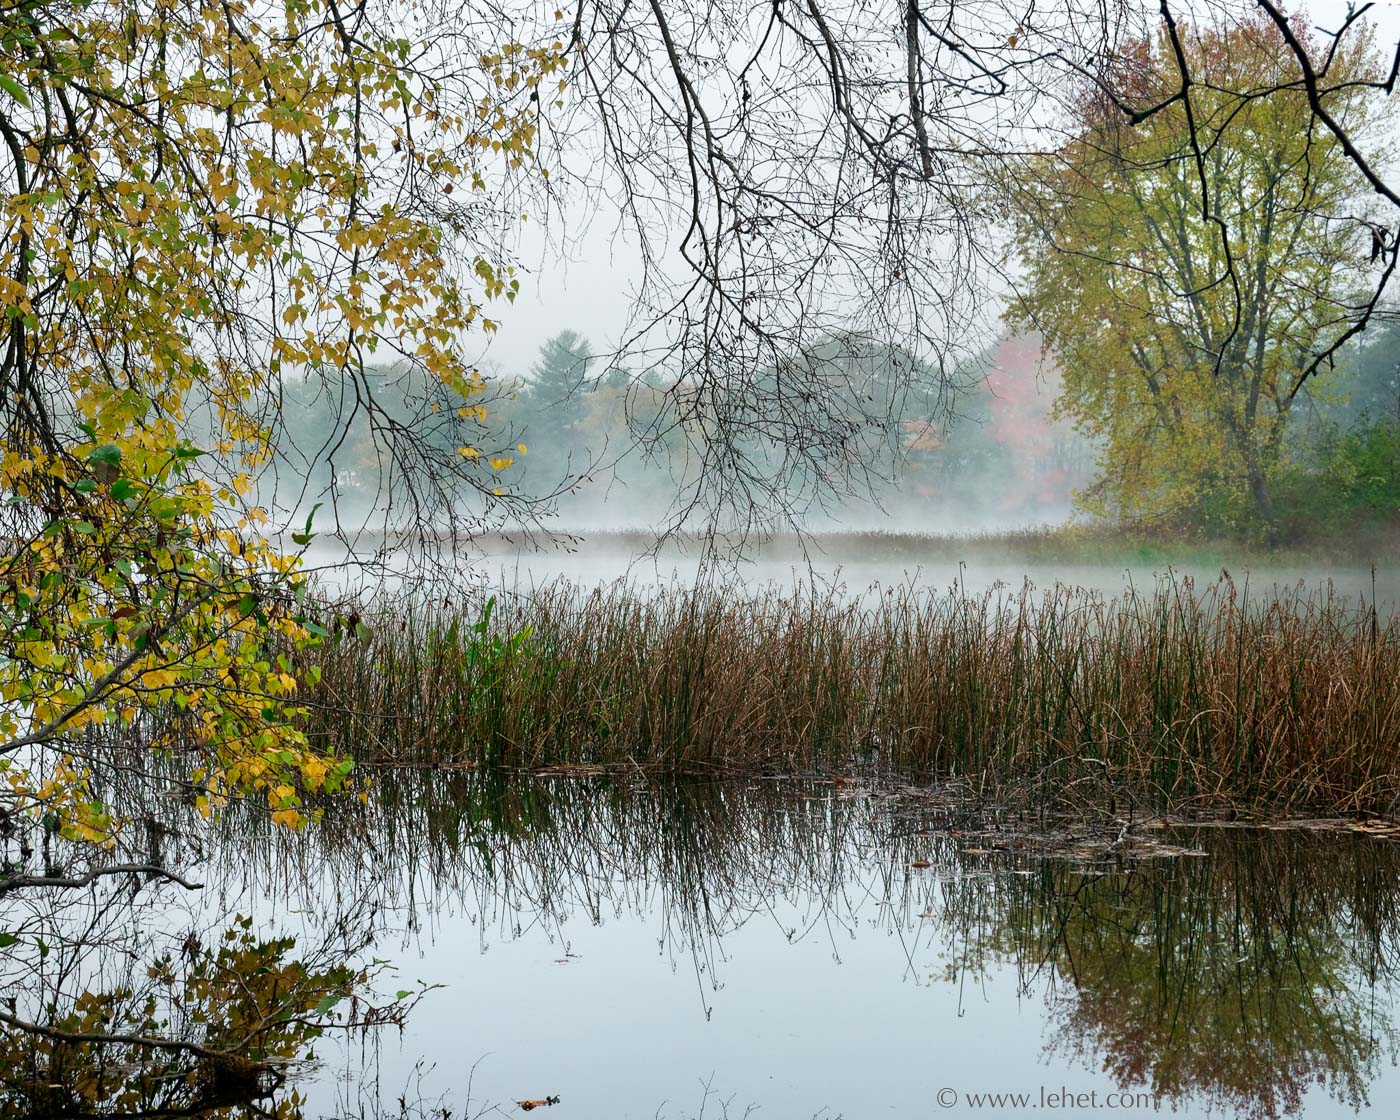 Fall Birches, Reeds and Mist